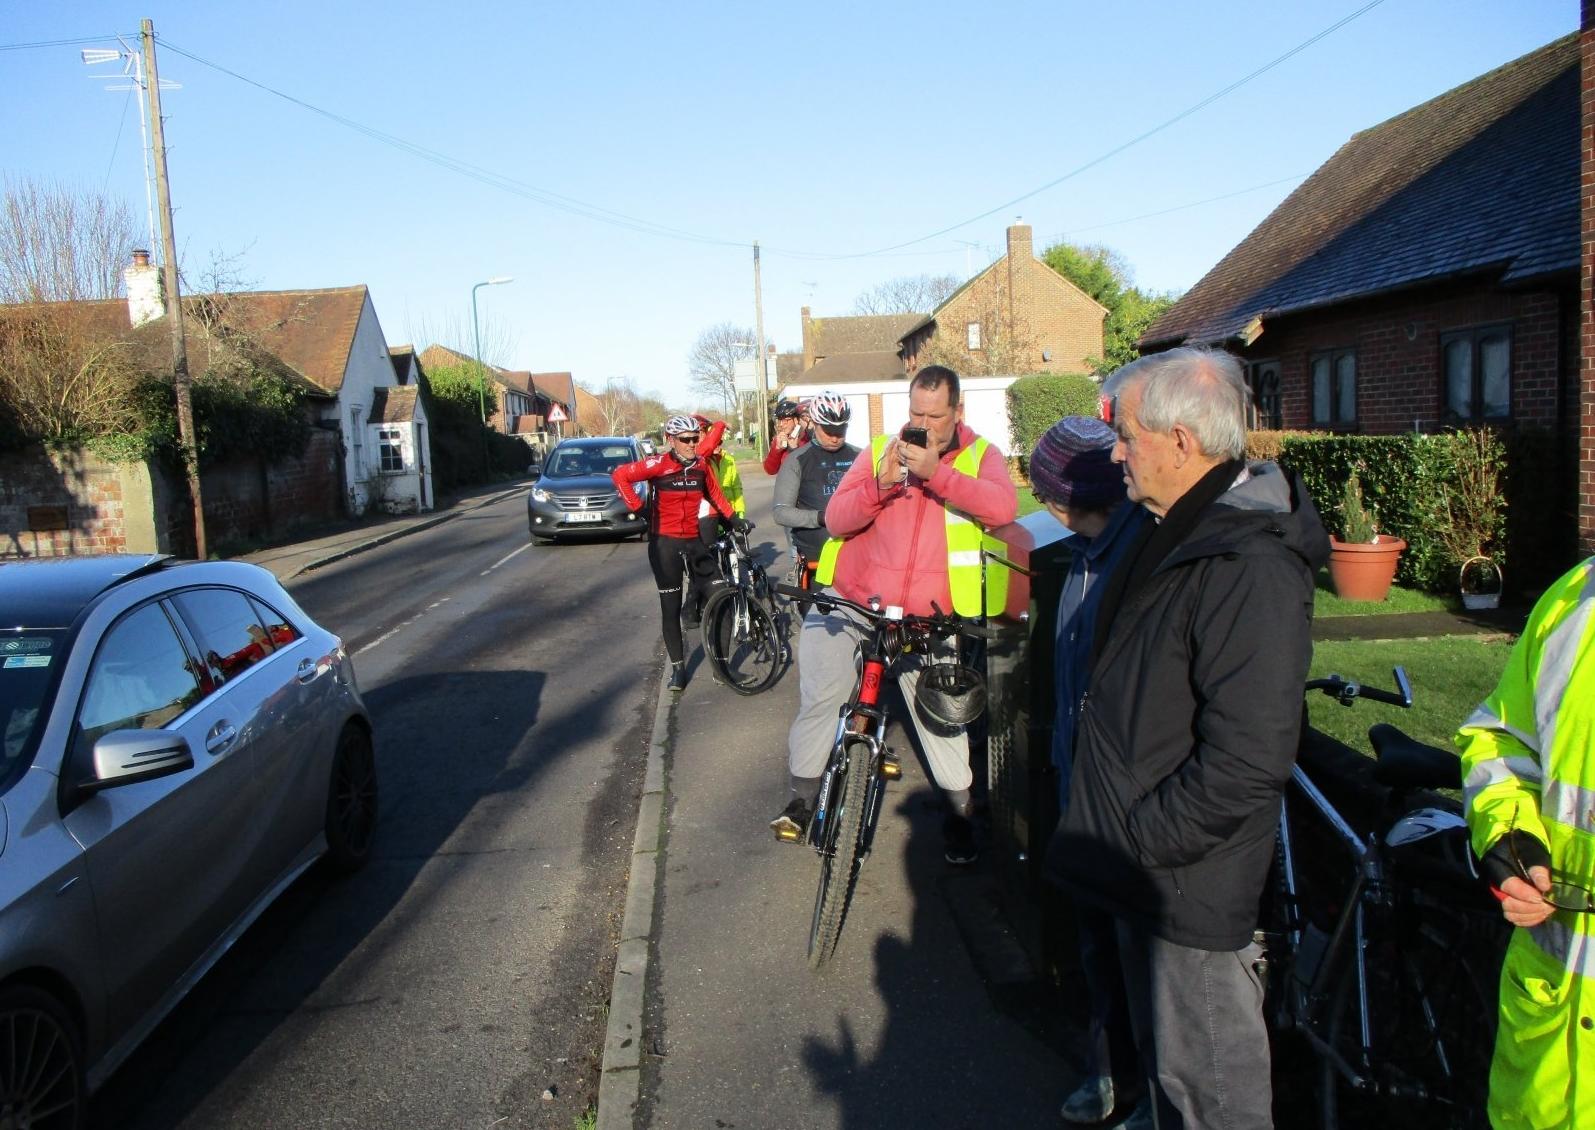 Following the death of well-known Bosham cyclist Gina McWilliam, a group of campaigners paid their respects and appealed for changes to the ‘inadequate’ road system at a well-attended event on Sunday. SUS-200122-104742001